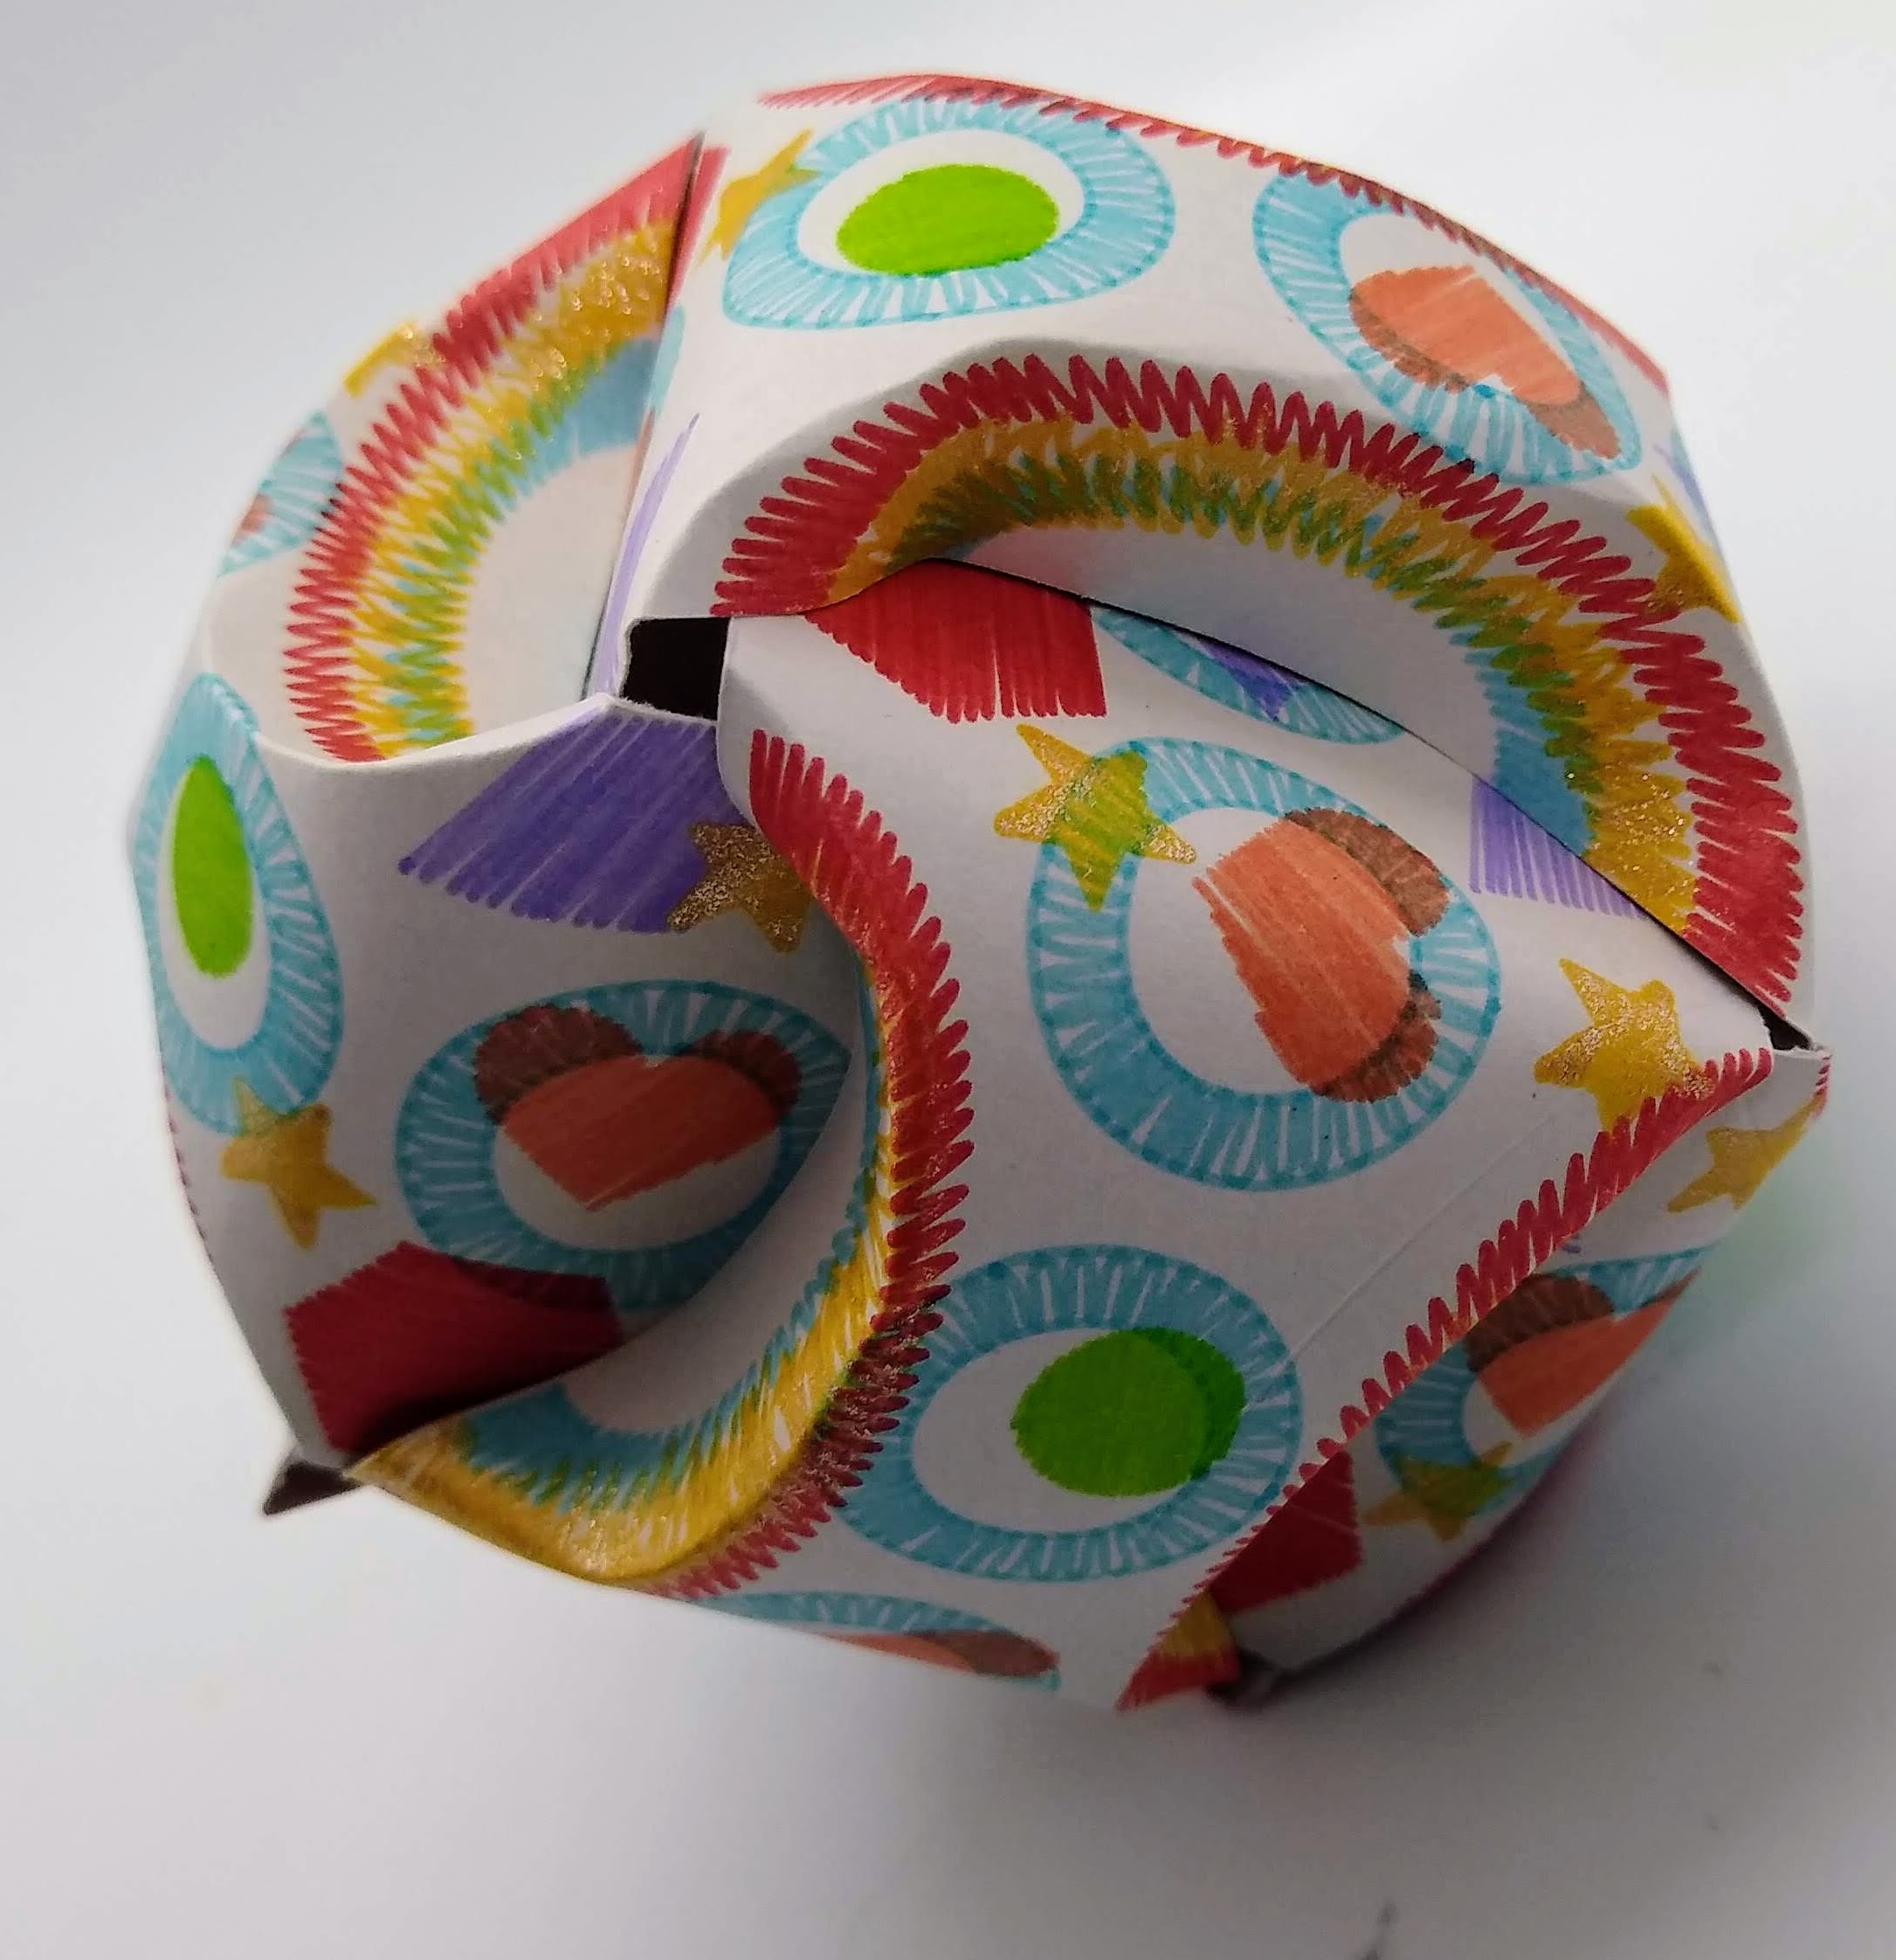 How to make triskele balls from cardstock